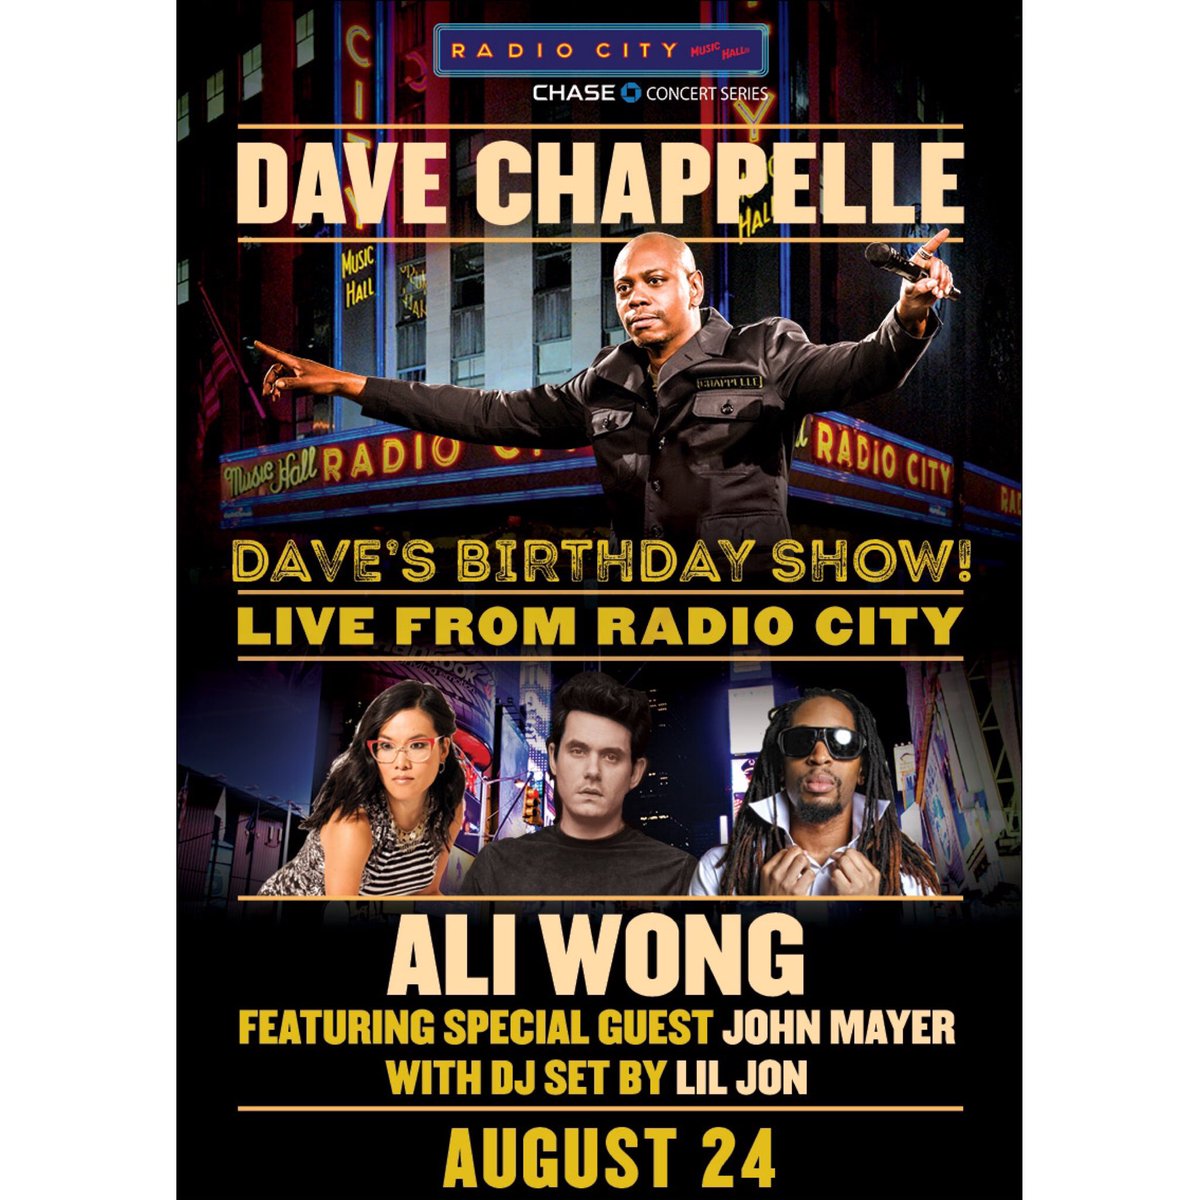 COME CELEBRATE @DaveChappelle BIRTHDAY WITH US AT @ RADIO CITY AUG 24 ????????????????TICKETS https://t.co/PBg8GDgjZ7 https://t.co/CjbCy0pbkU